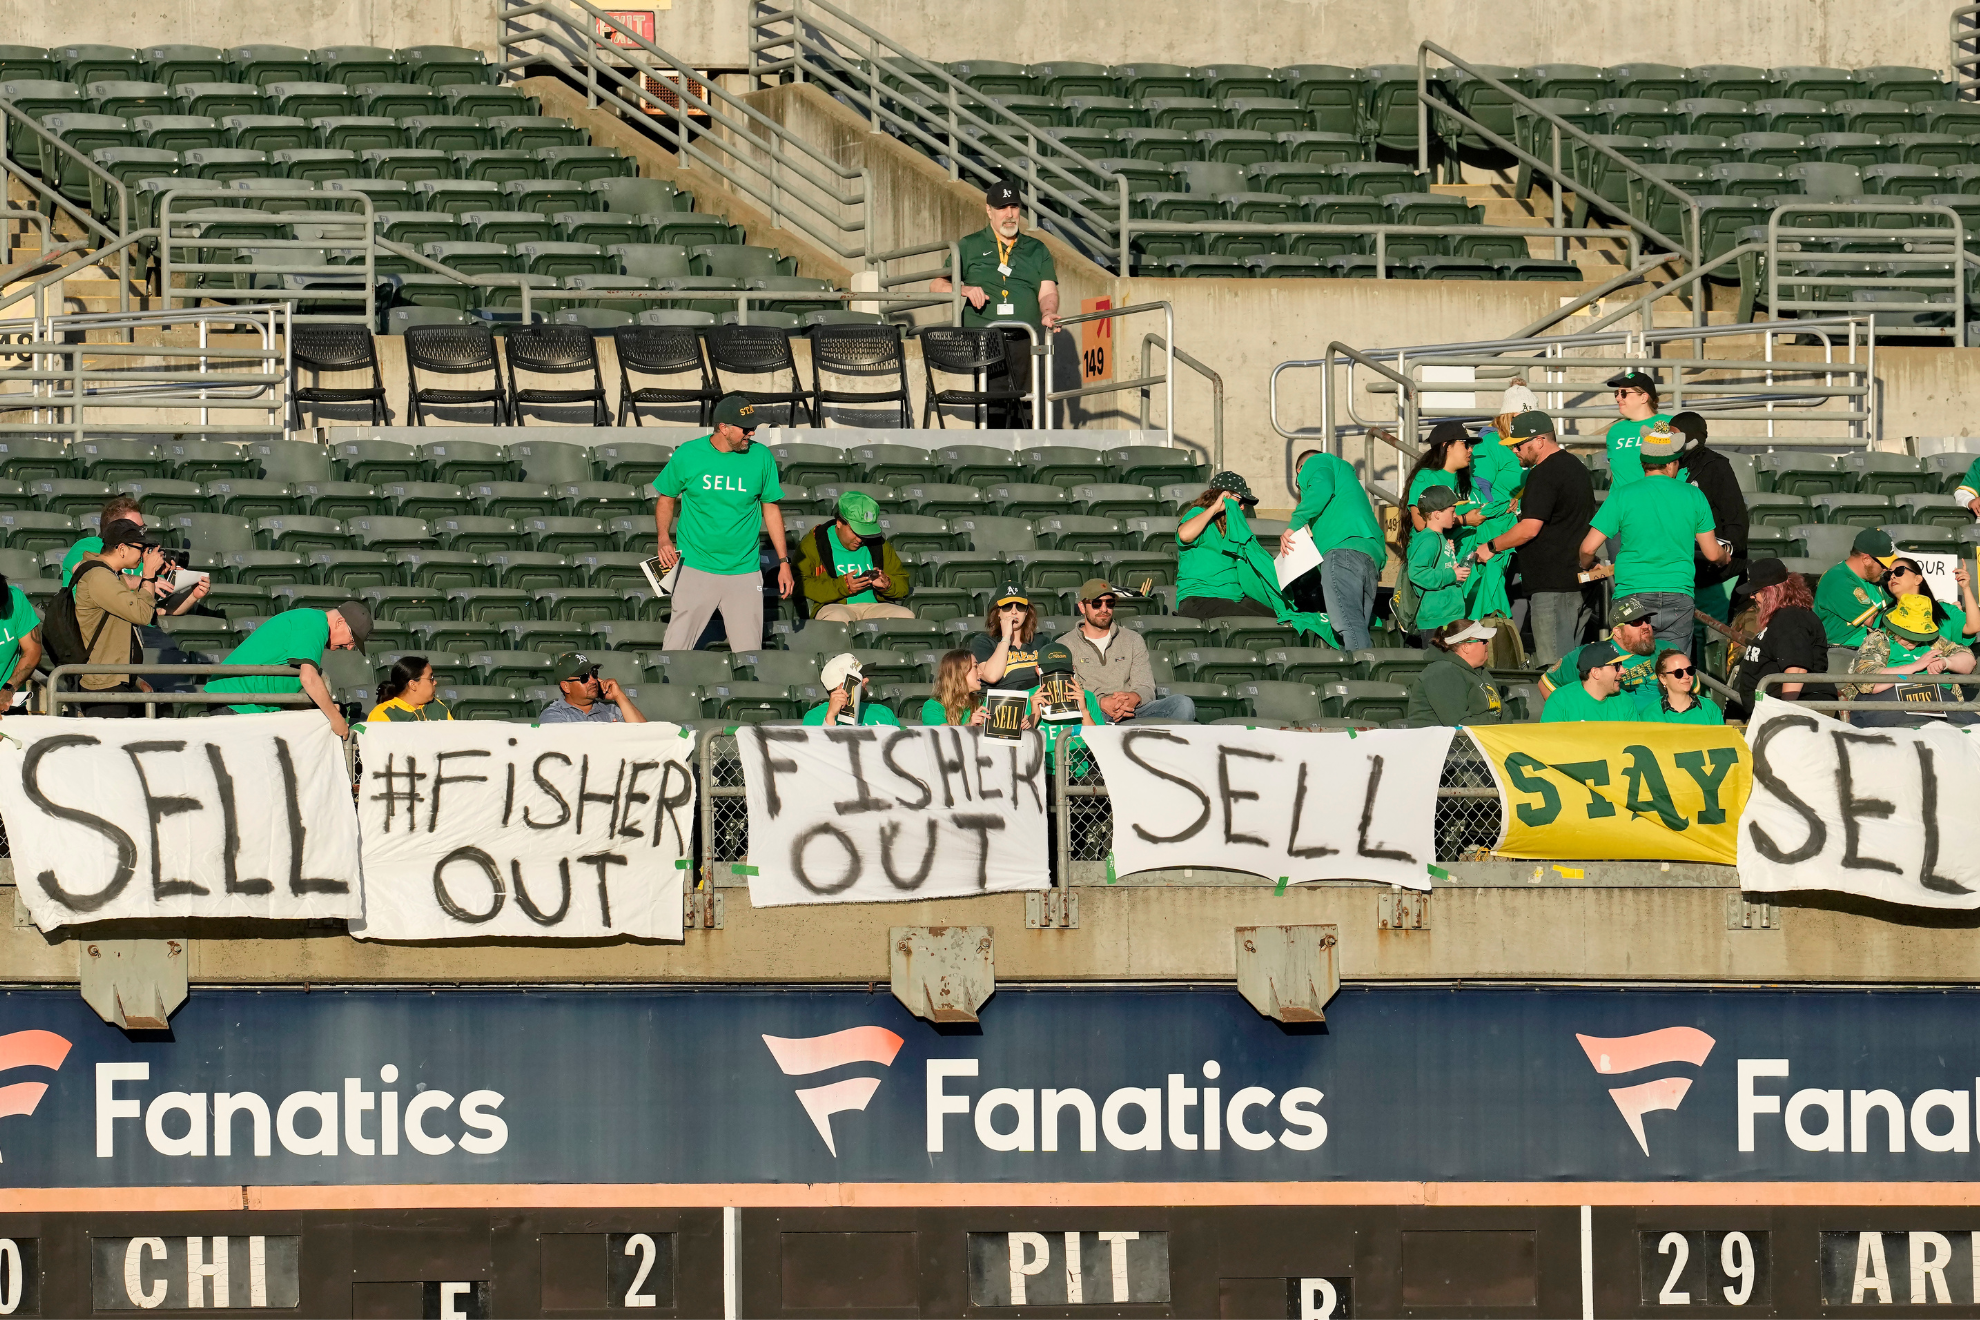 As fans demanding owner John Fisher to sell the team, in hopes it remains in Oakland.